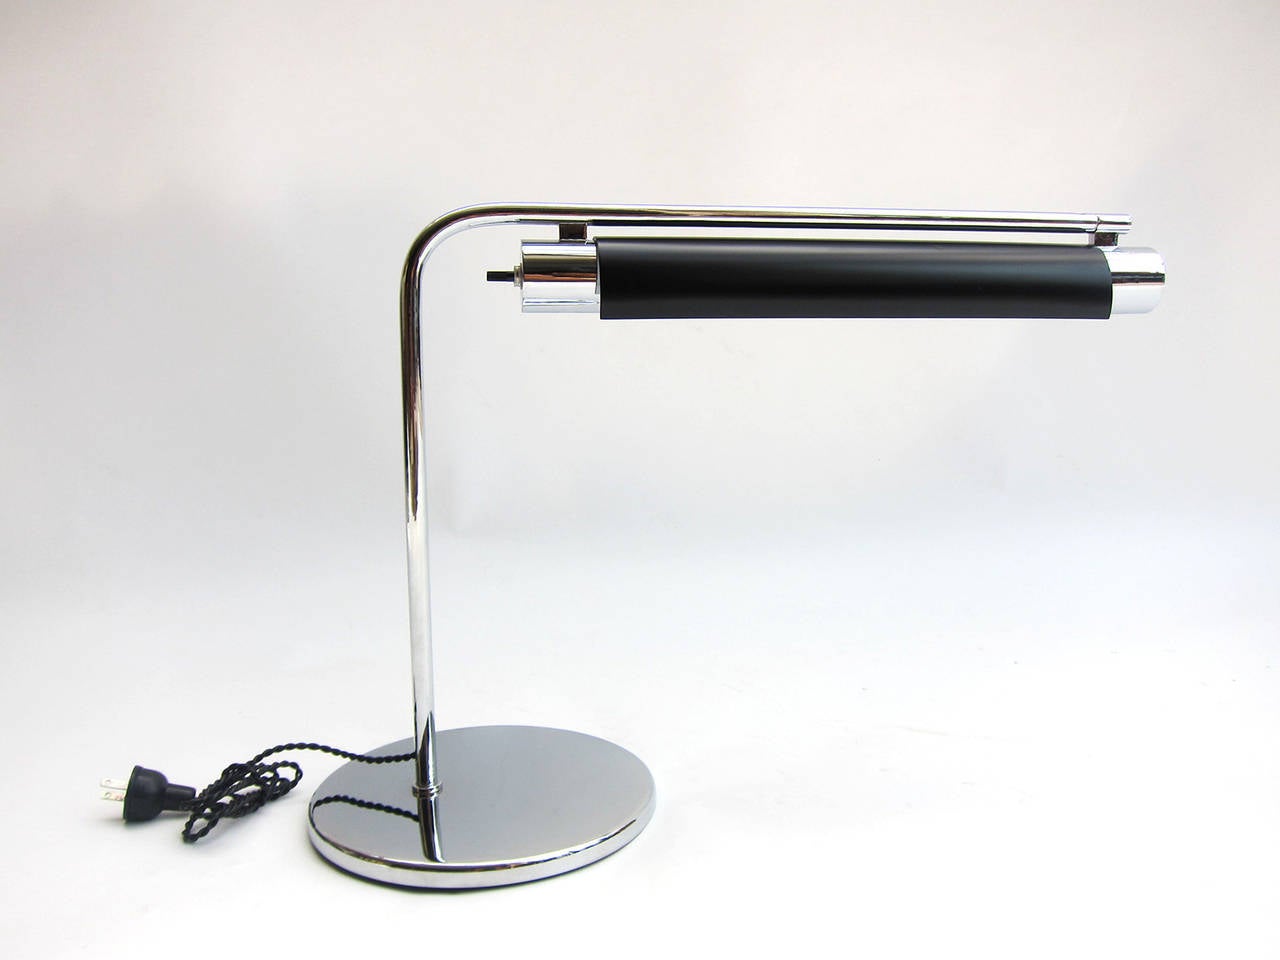 Very sleek desk lamp of chromed steel and lacquered metal. Clean, uninterrupted lines lend a bold elegance in the tradition of the modernists. (Base measures 8.20” in diameter).